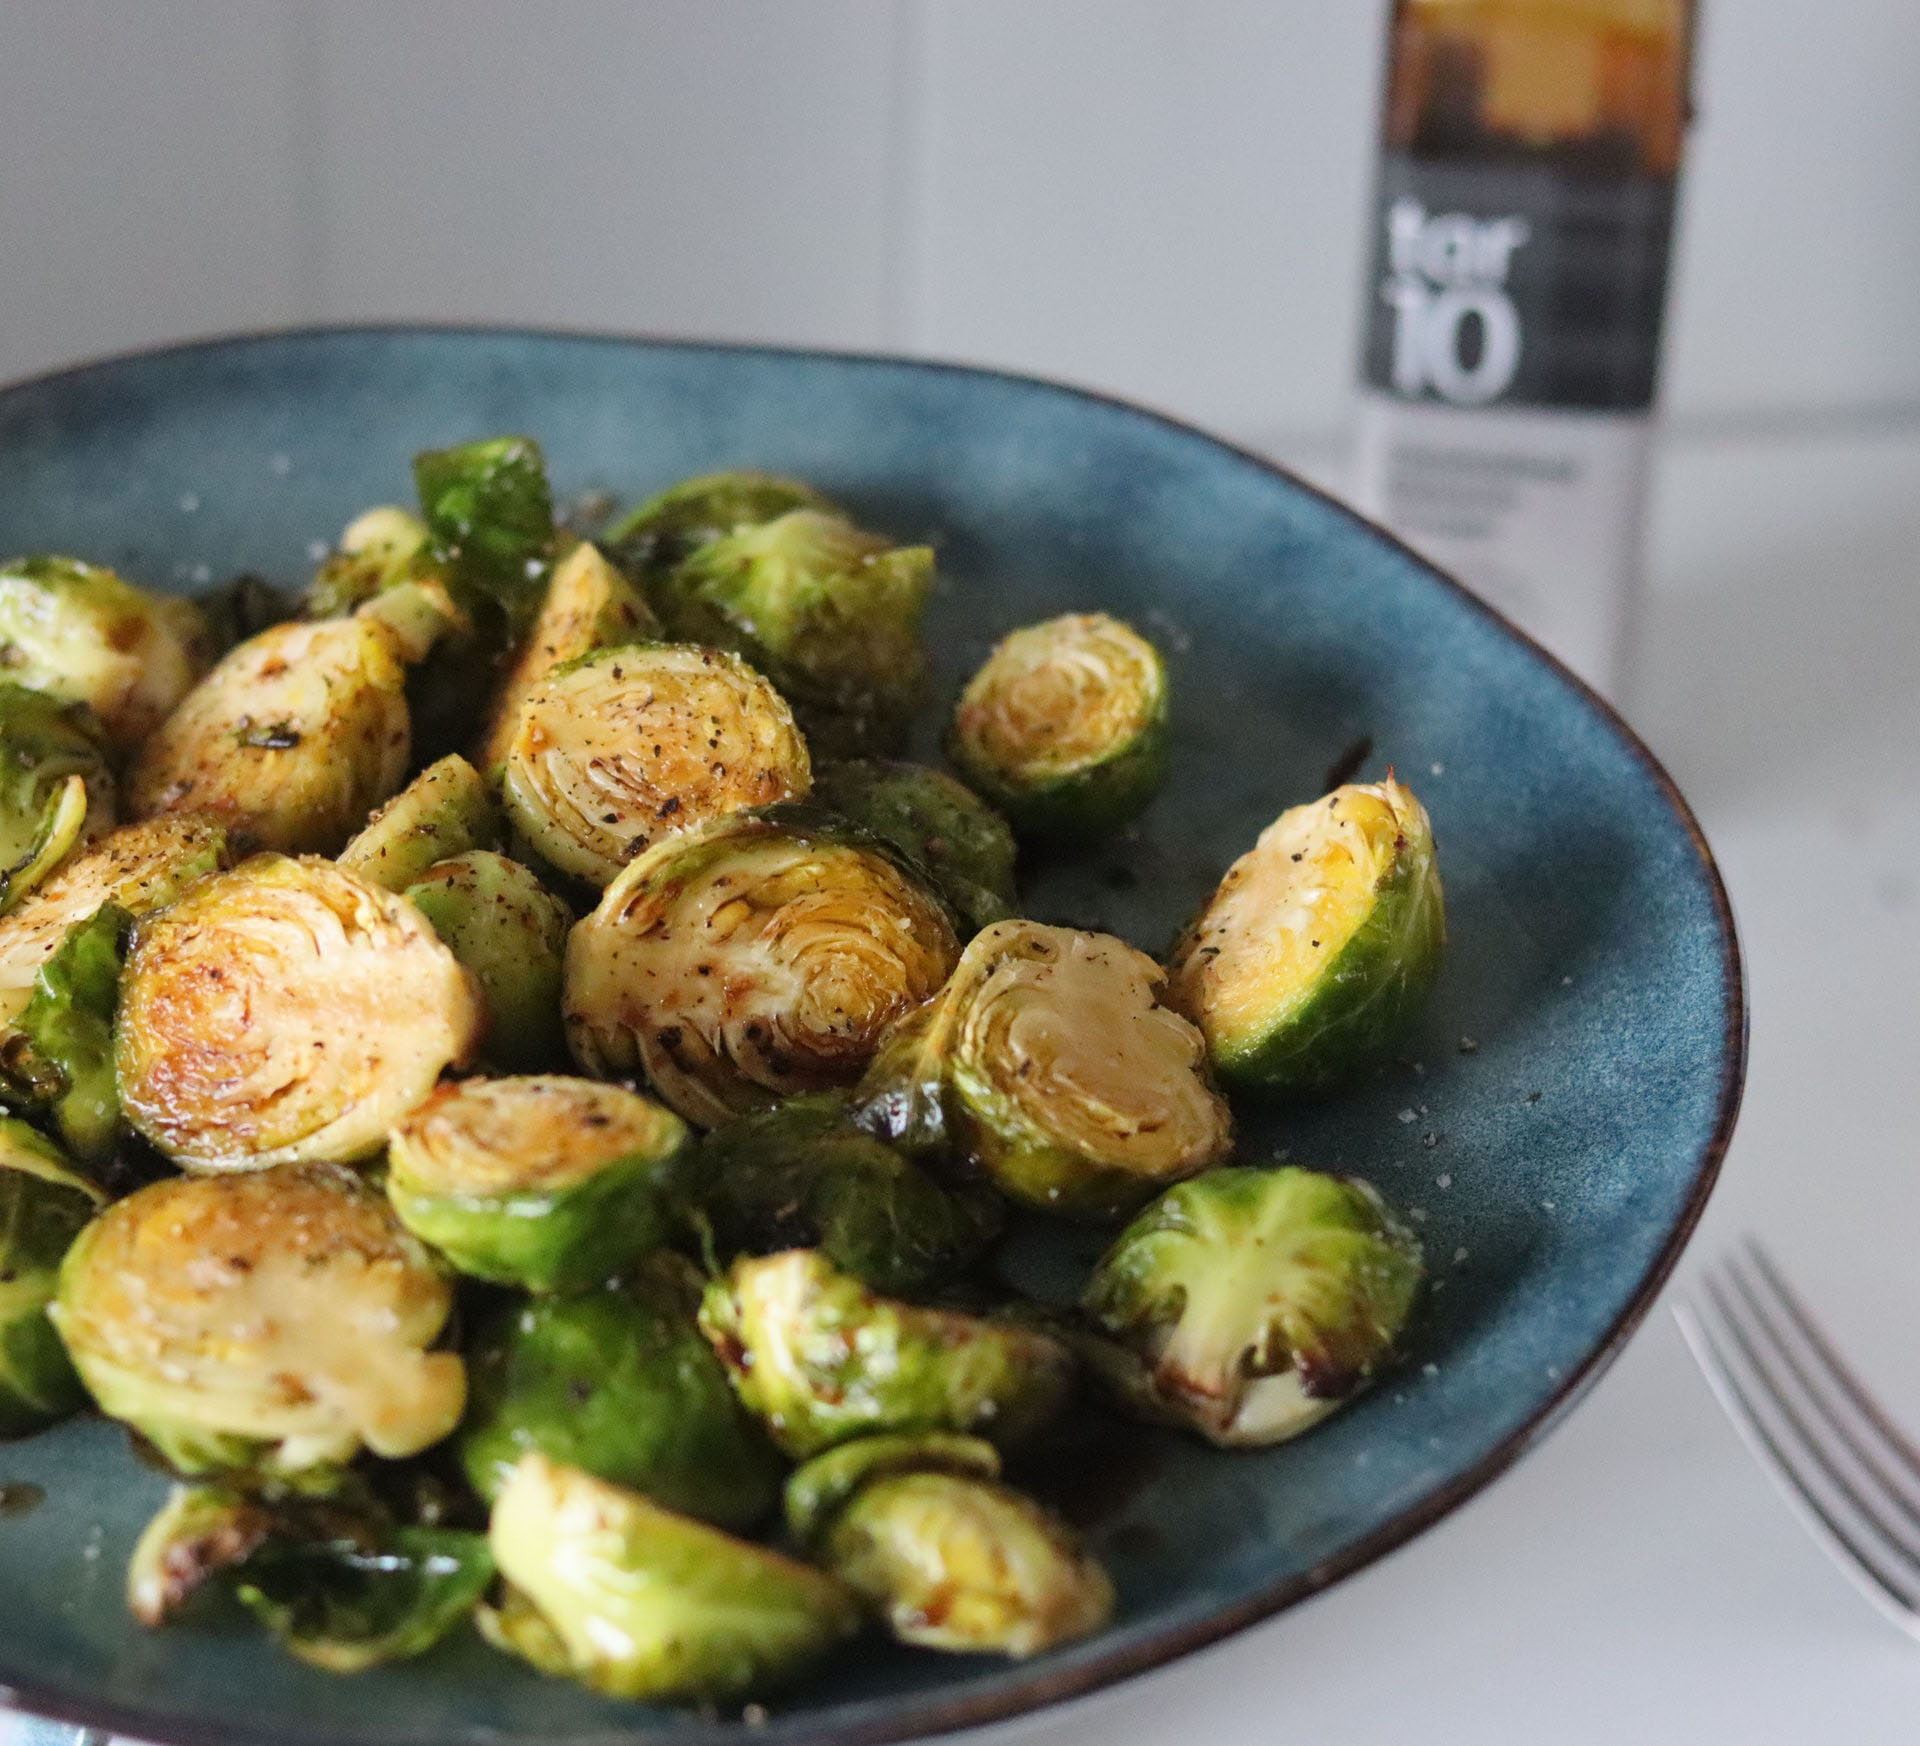 Brussel sprouts in a blue bowl.